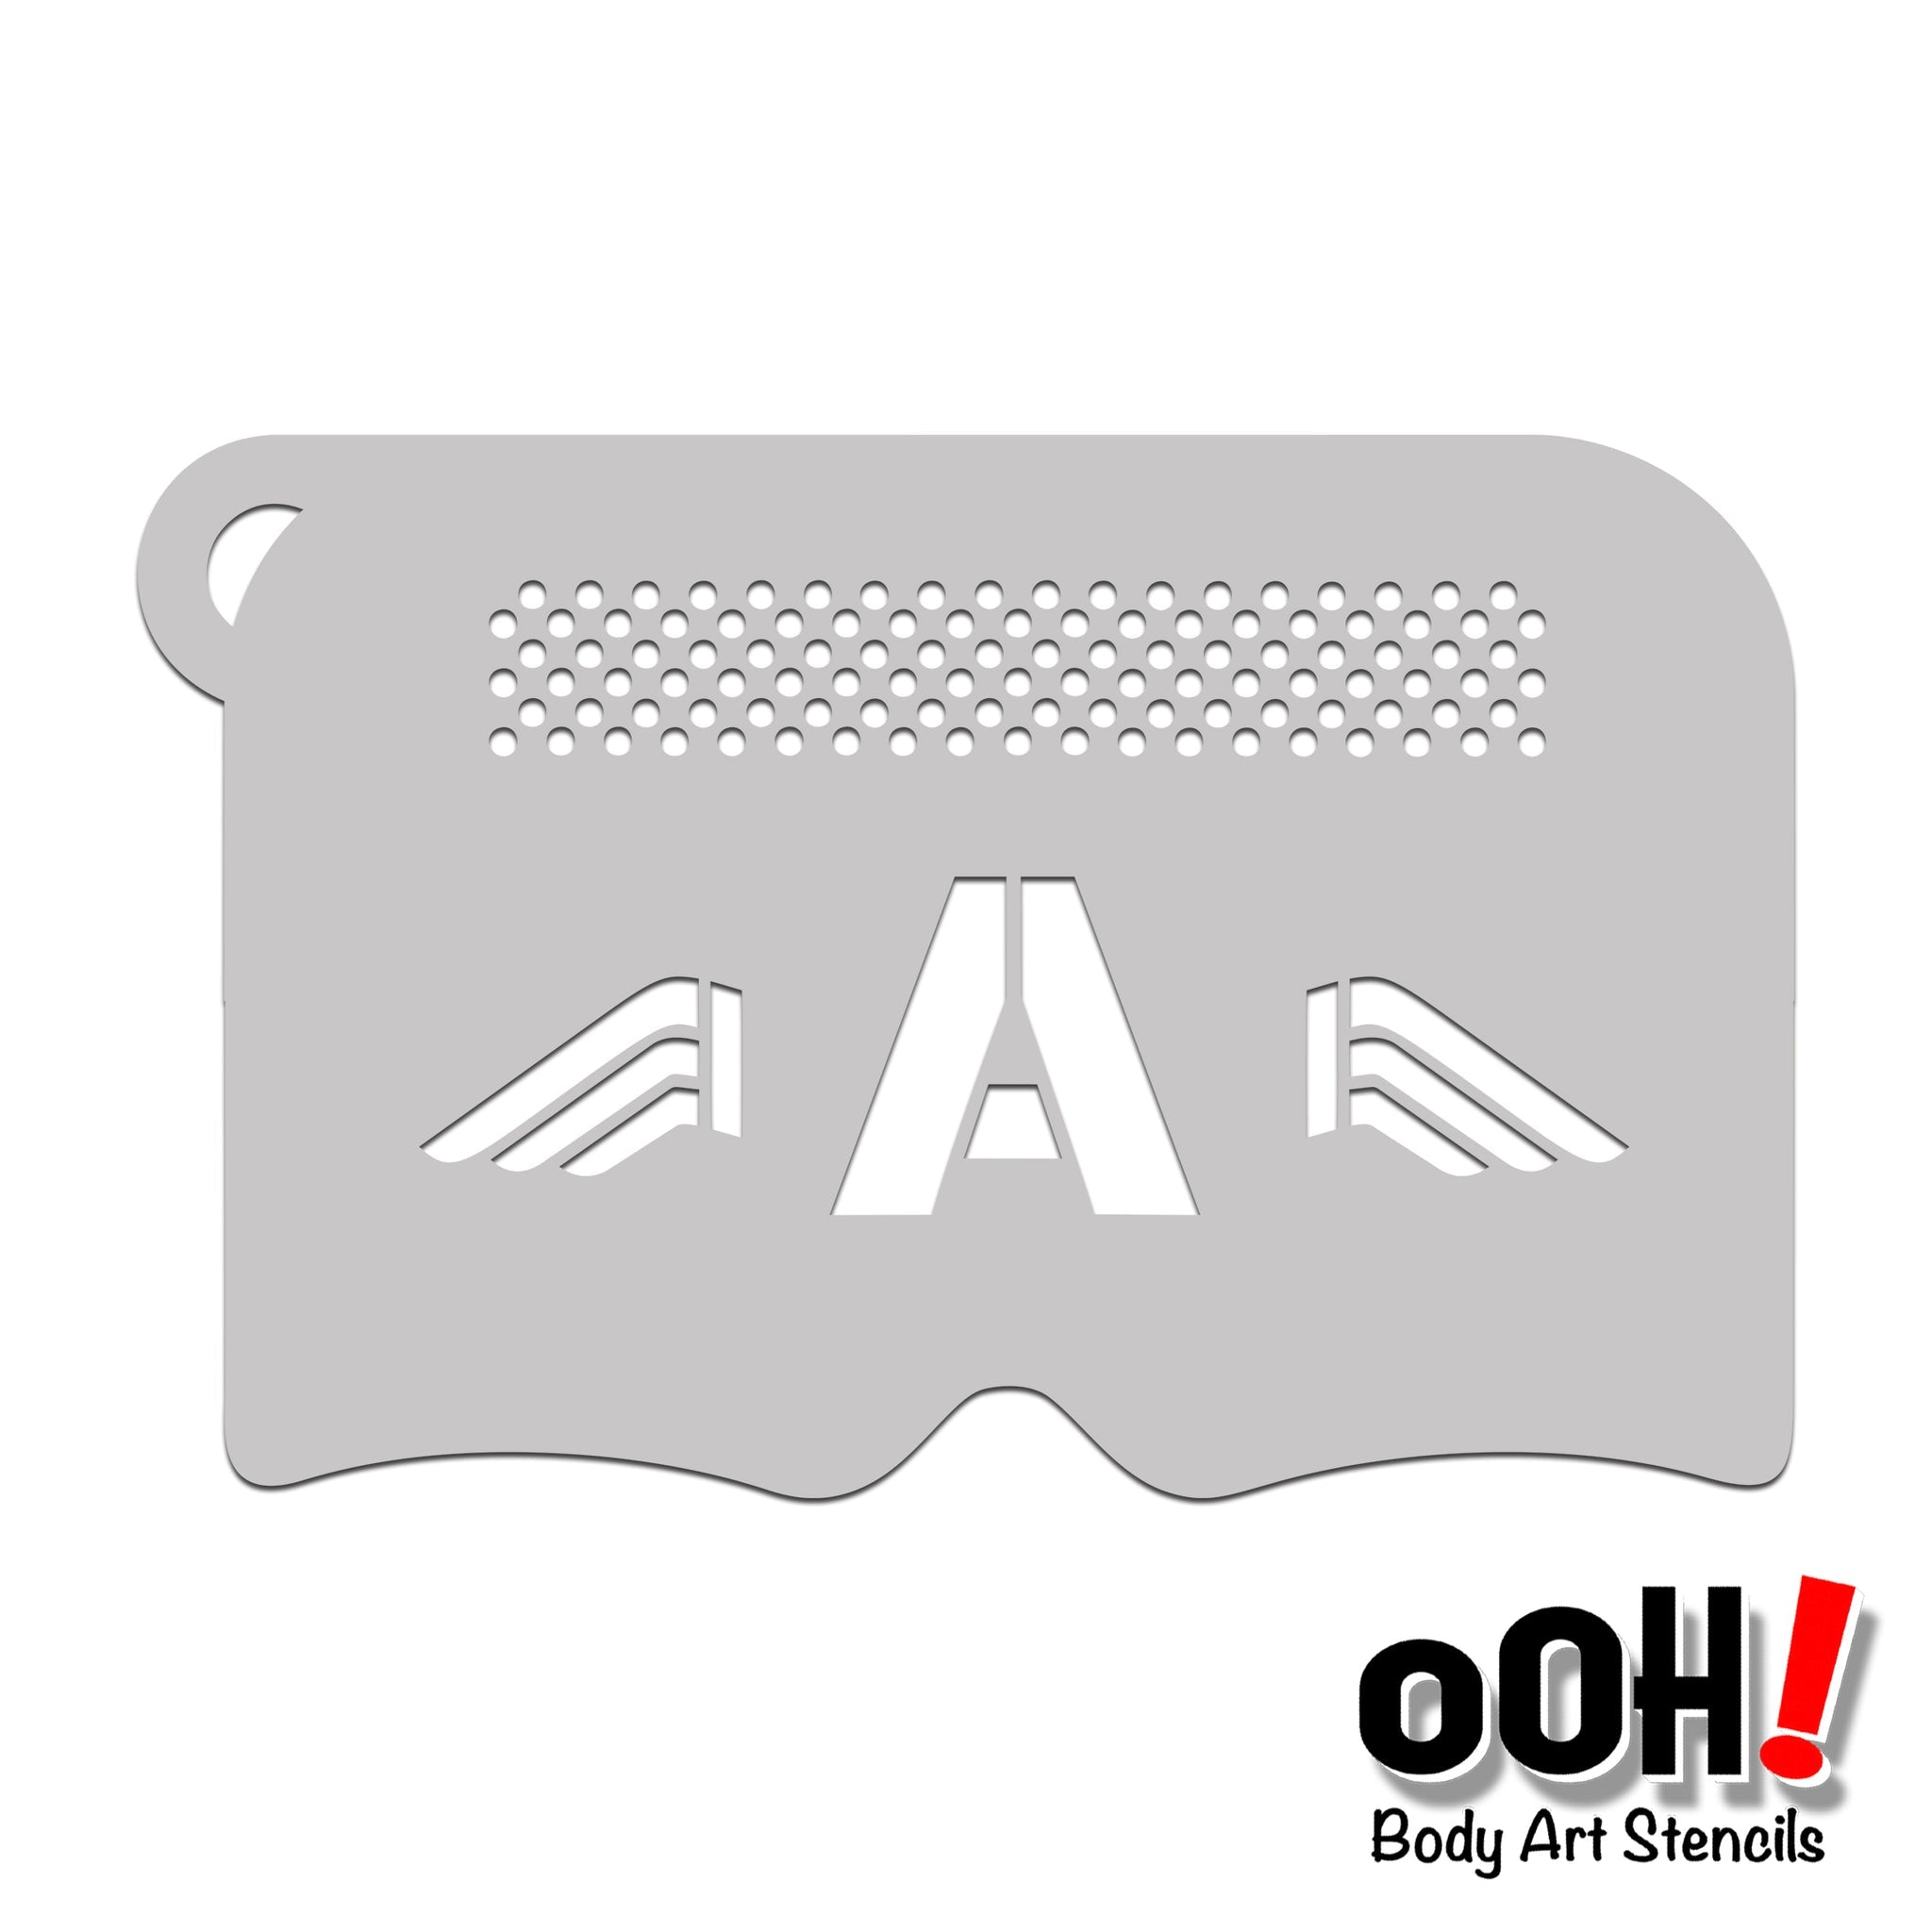 Captain Awesome Mask Stencil K04 - Ooh! Body Art Stencils